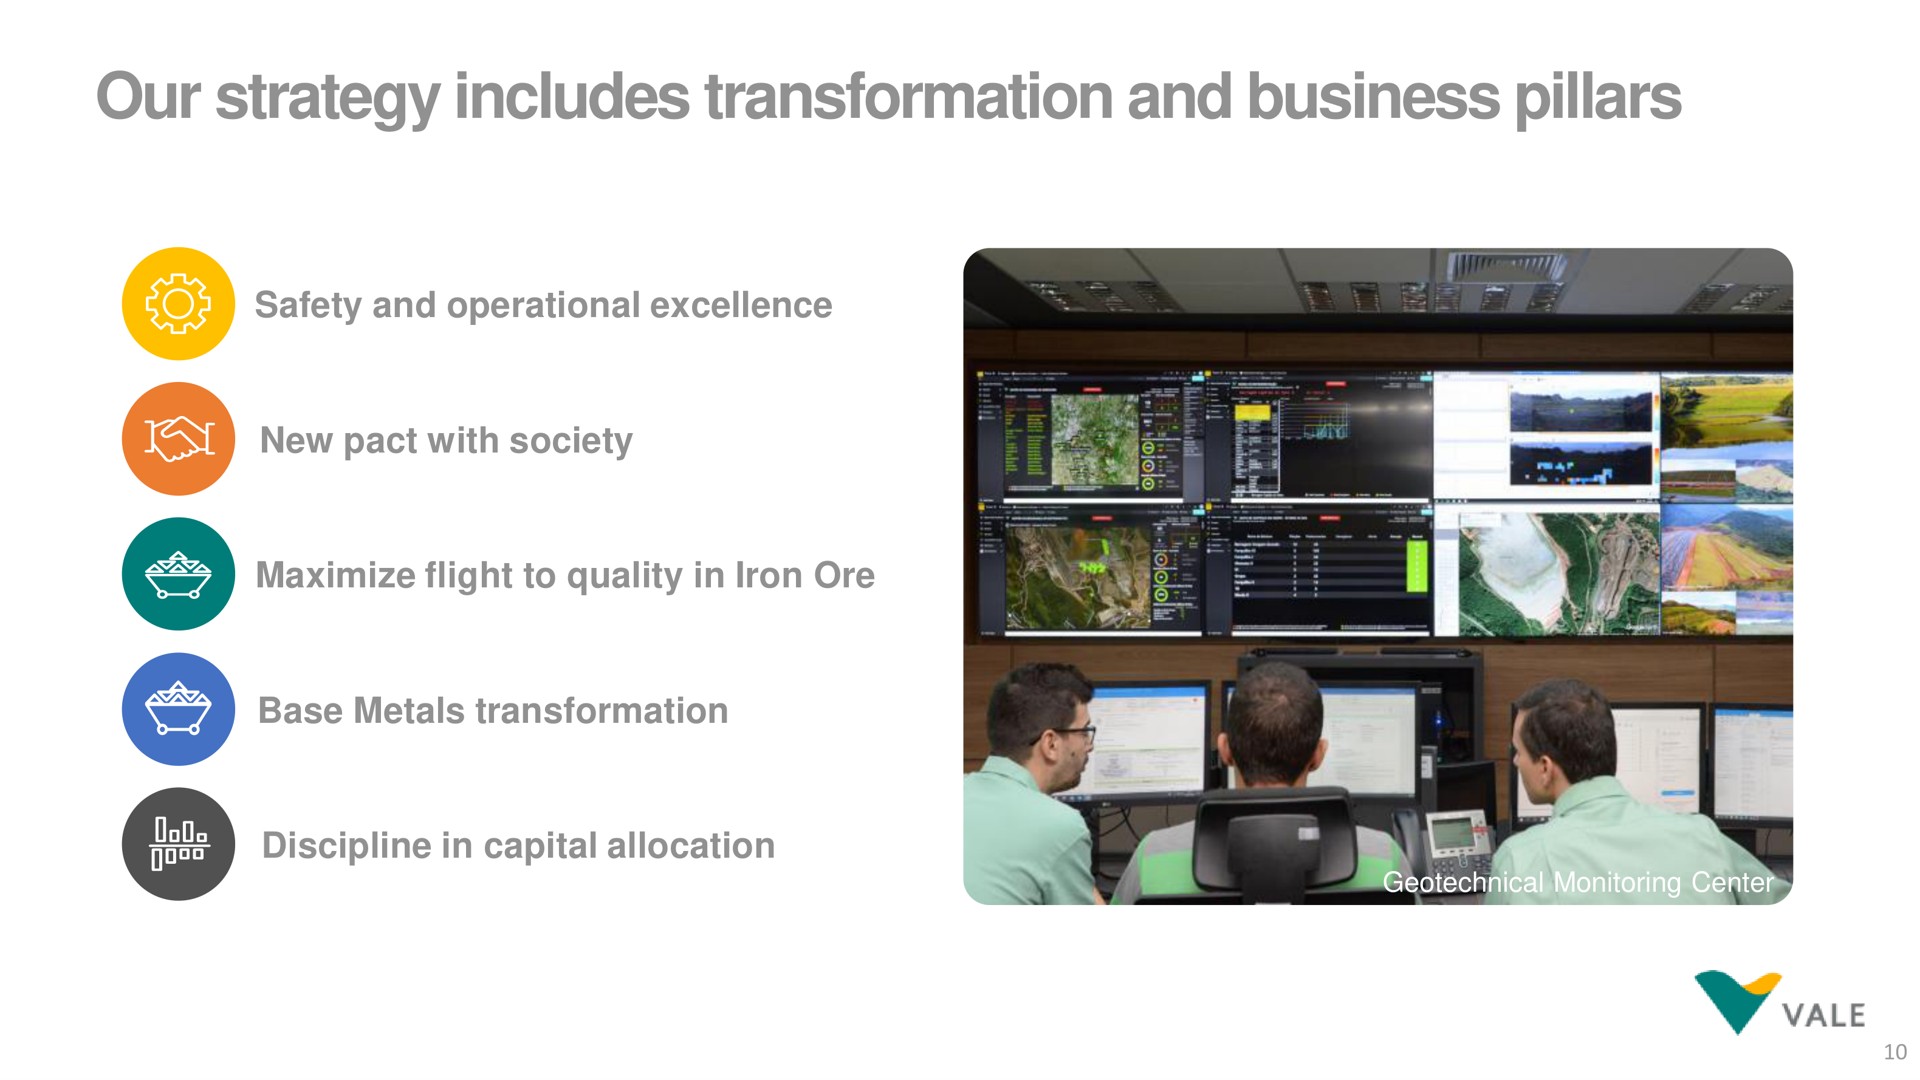 our strategy includes transformation and business pillars safety operational excellence new pact with society maximize flight to quality in iron ore discipline in capital allocation | Vale